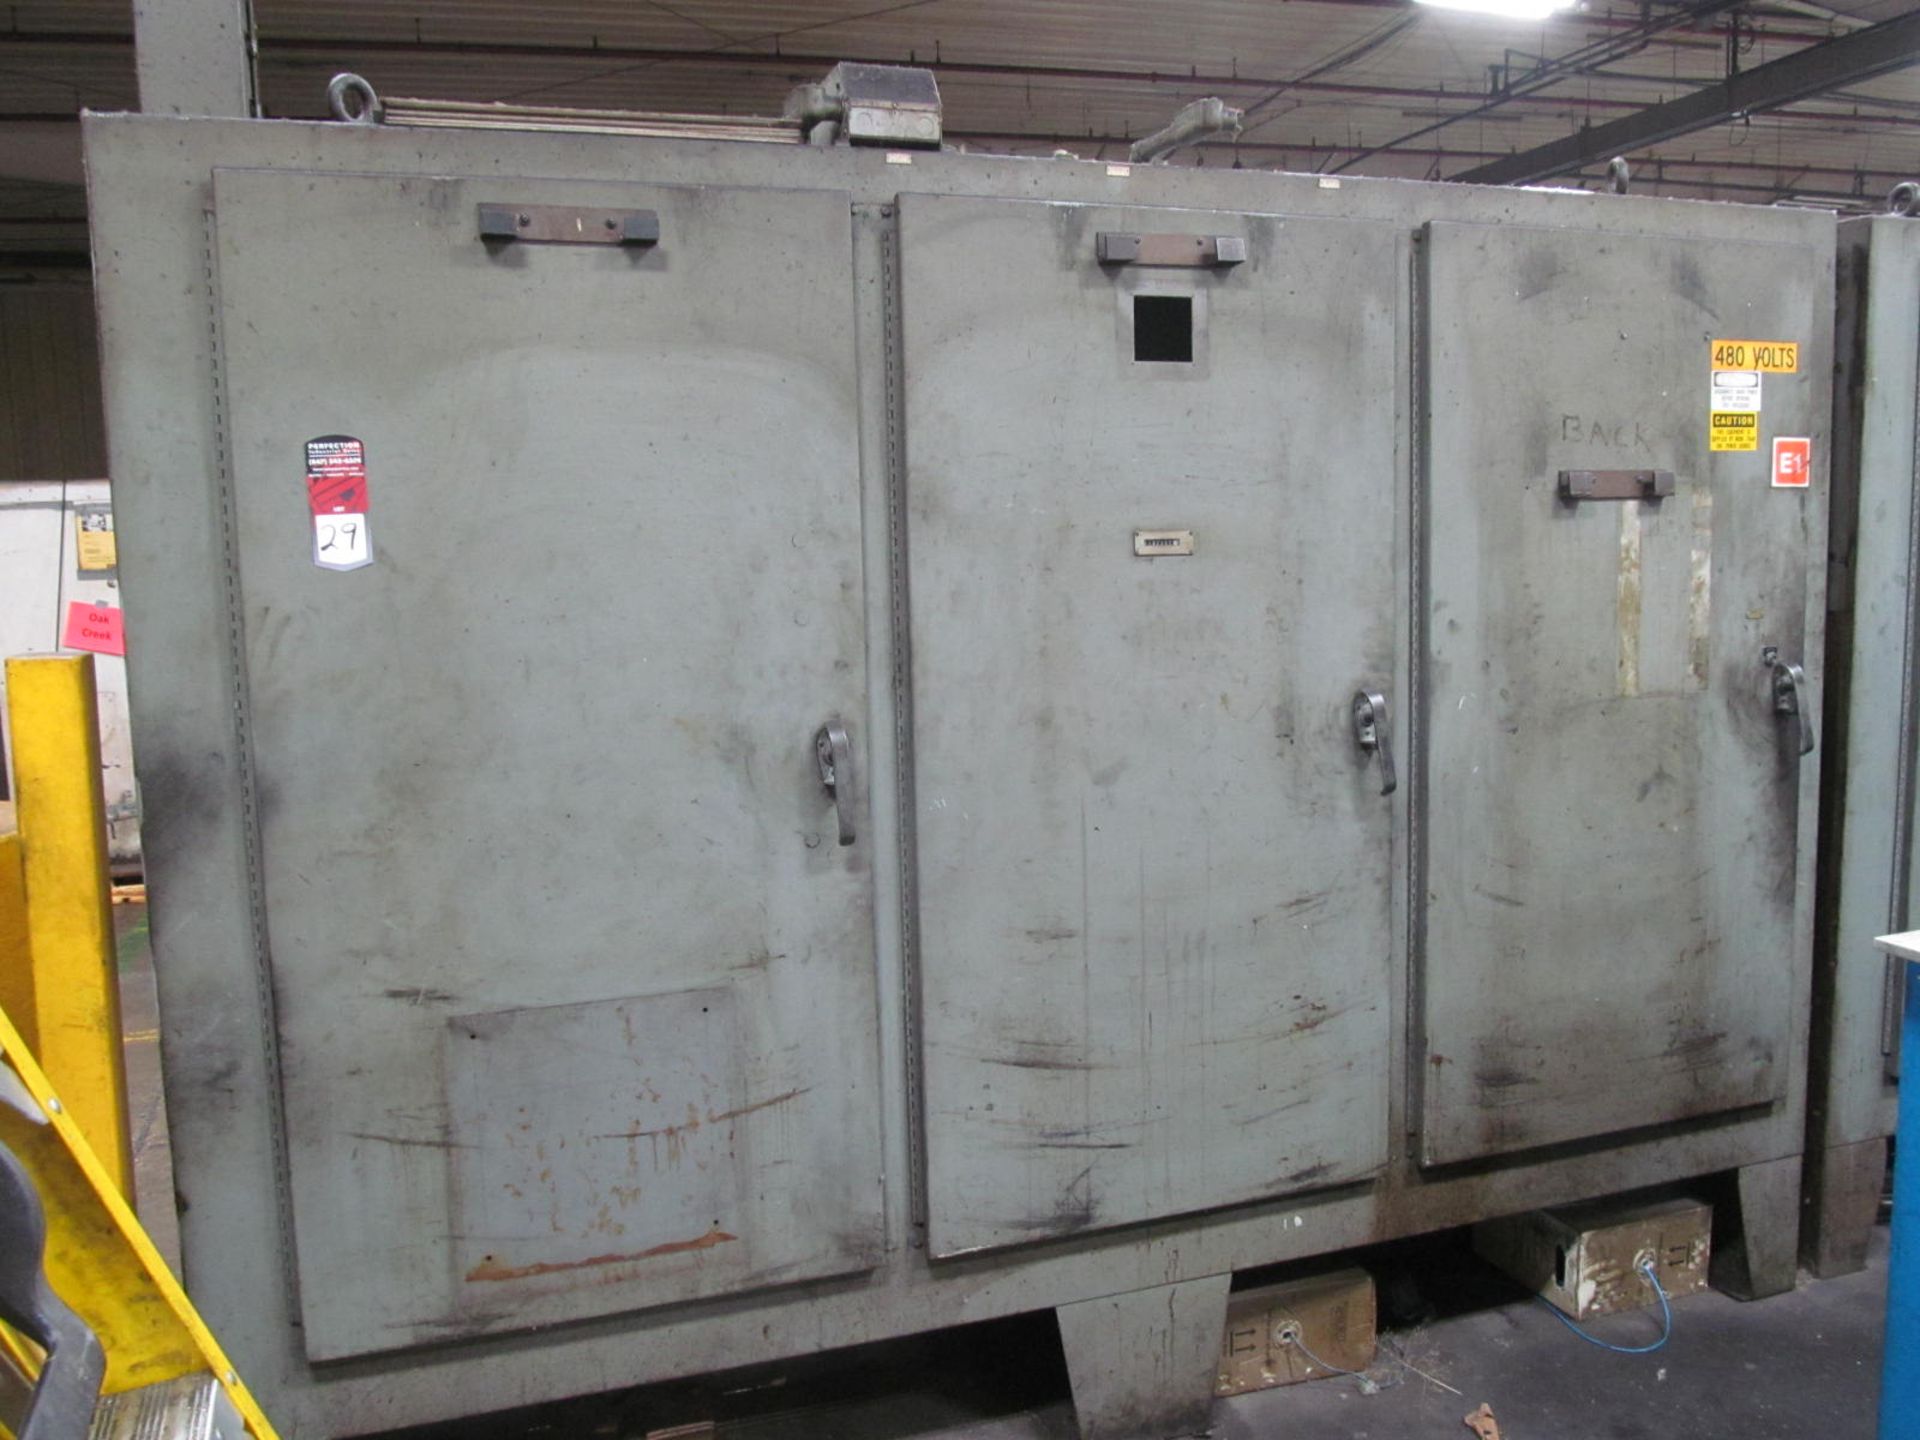 (2) 3-Door Electrical Cabinets Converted to Storage Cabinets